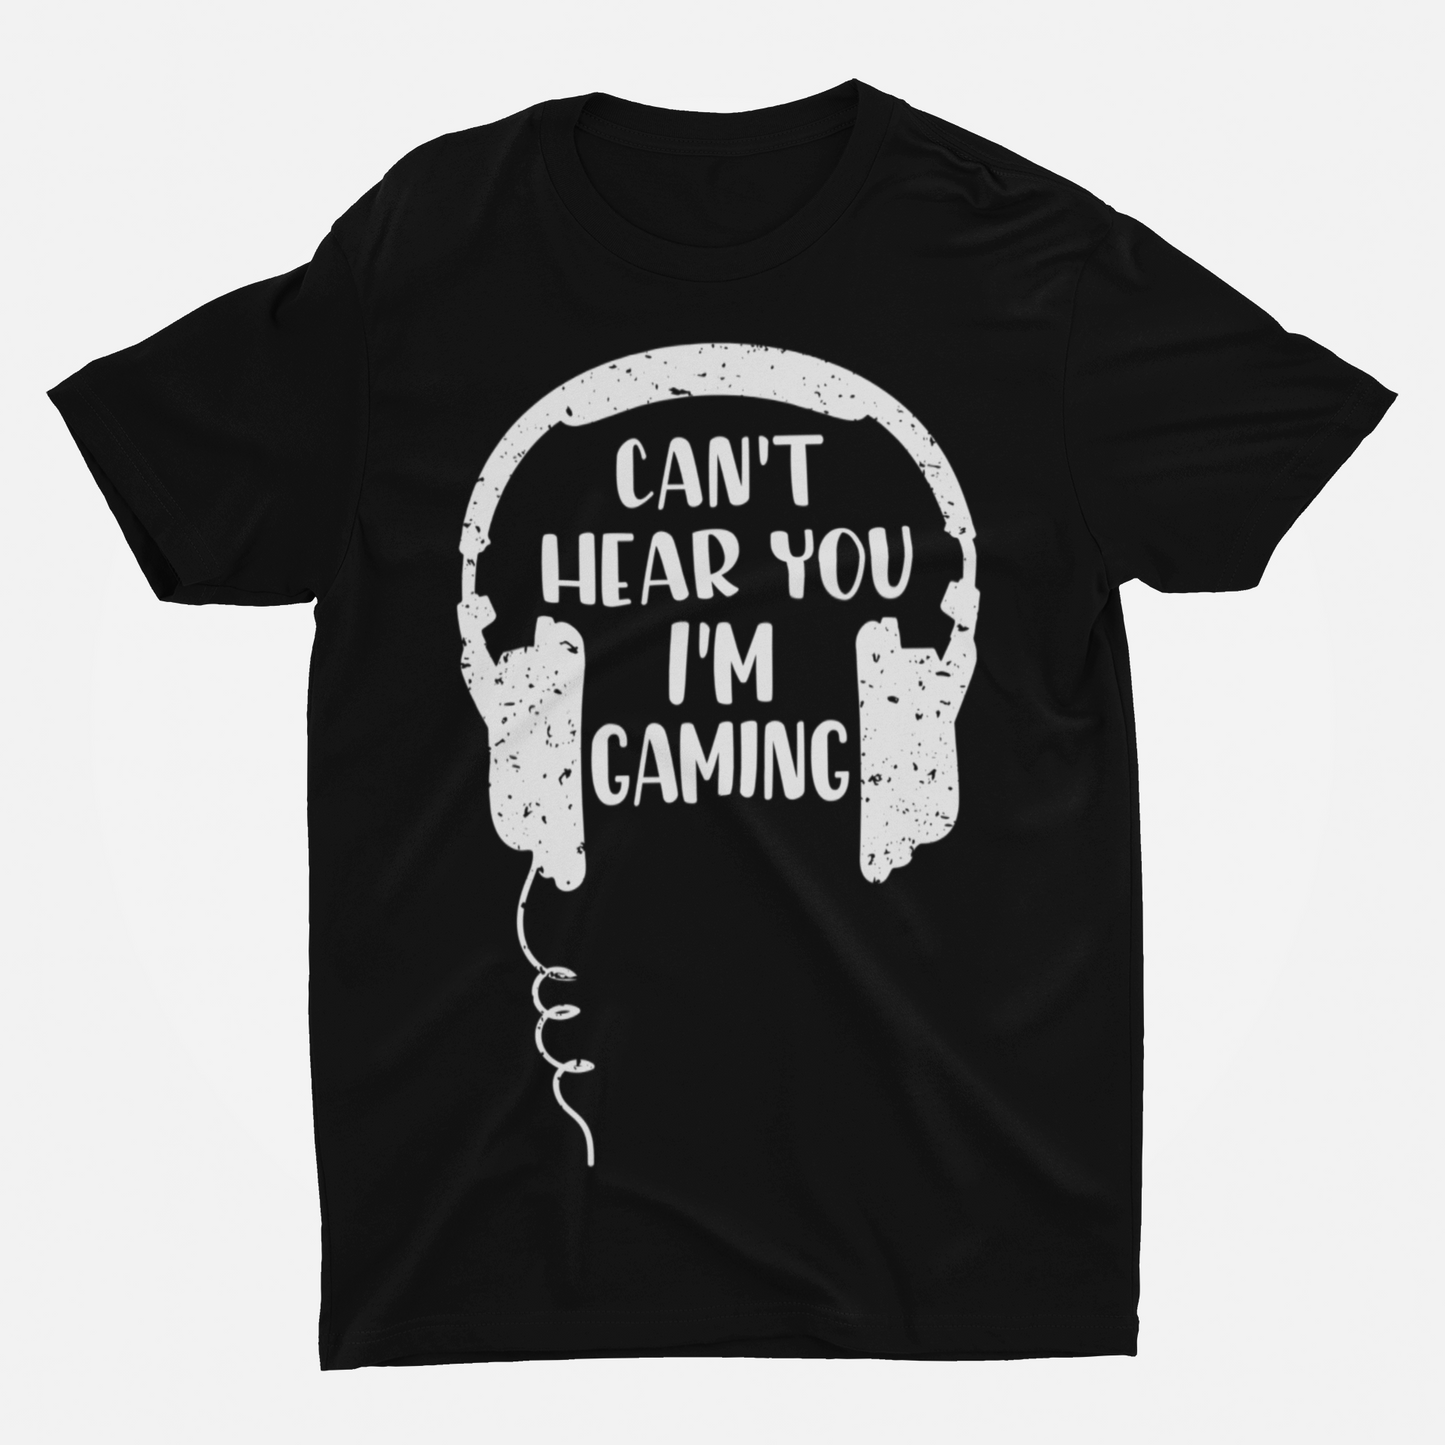 I Cant Hear You I Am Gaming Black Round Neck T-Shirt for Men